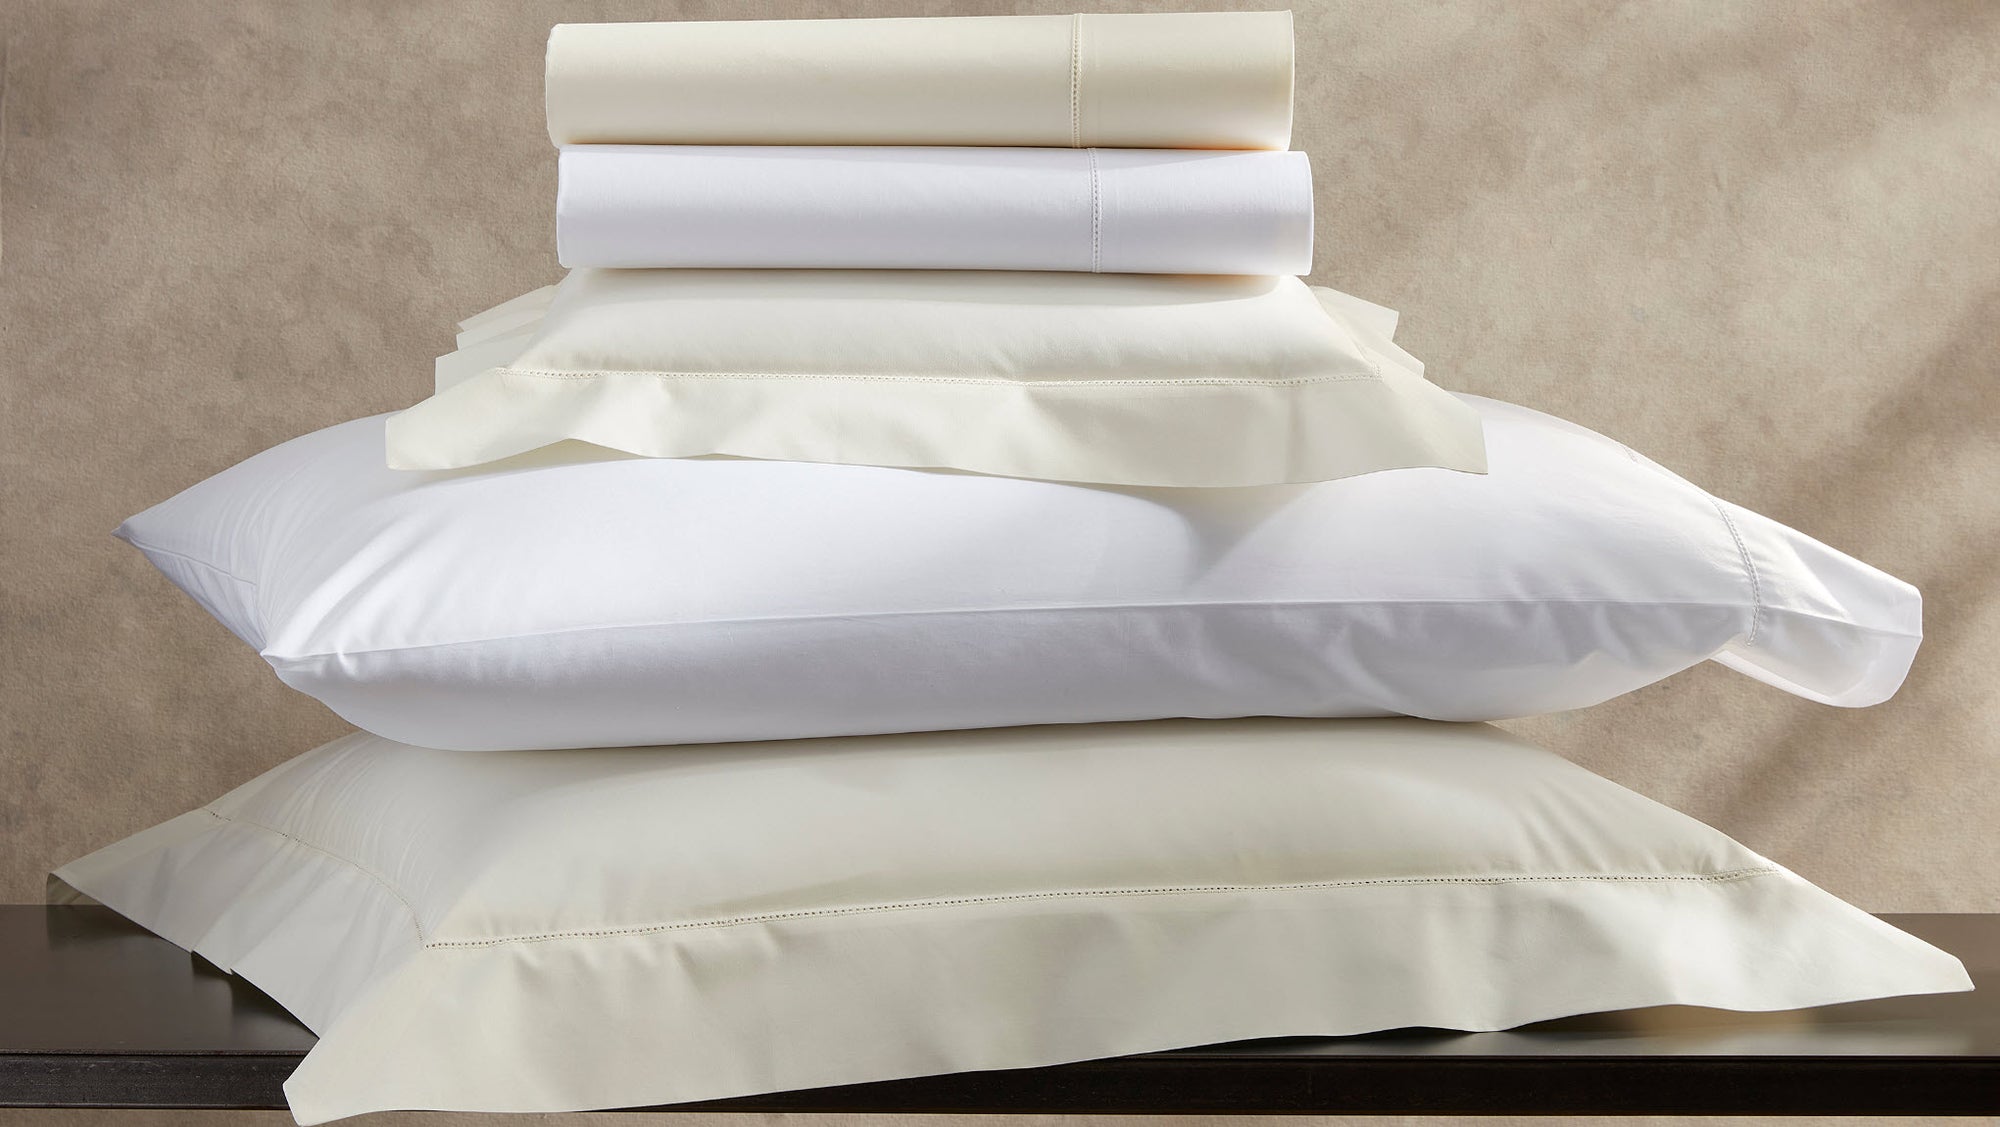 Best Sheets for Warm Weather: The Ultimate Luxury Sheets Guide for Staying Cool This Summer